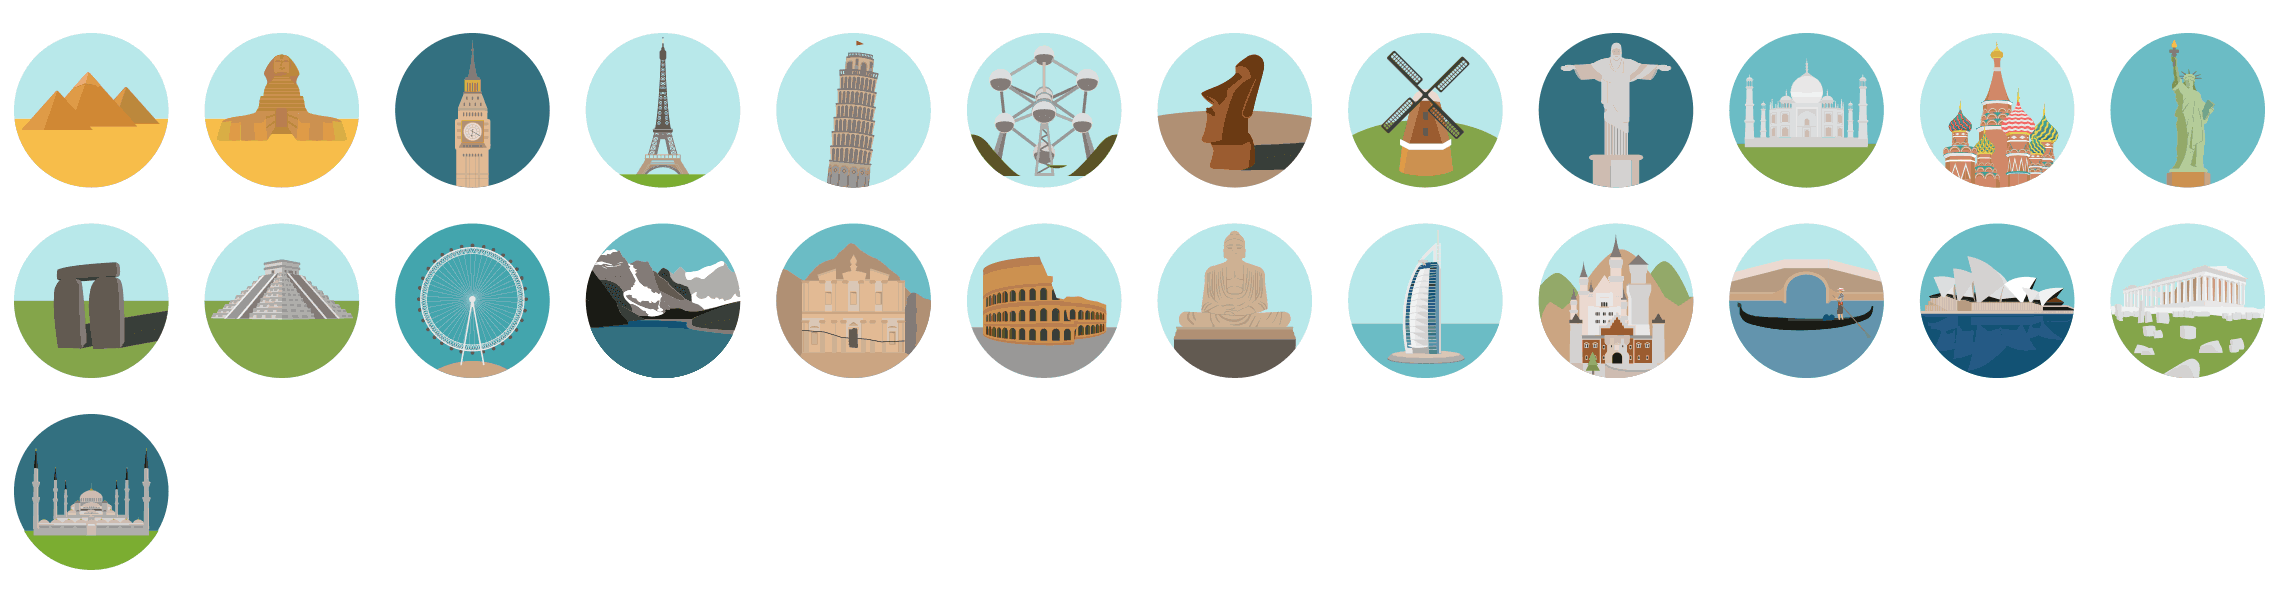 world-monuments-flat-icons-vol-1-preview